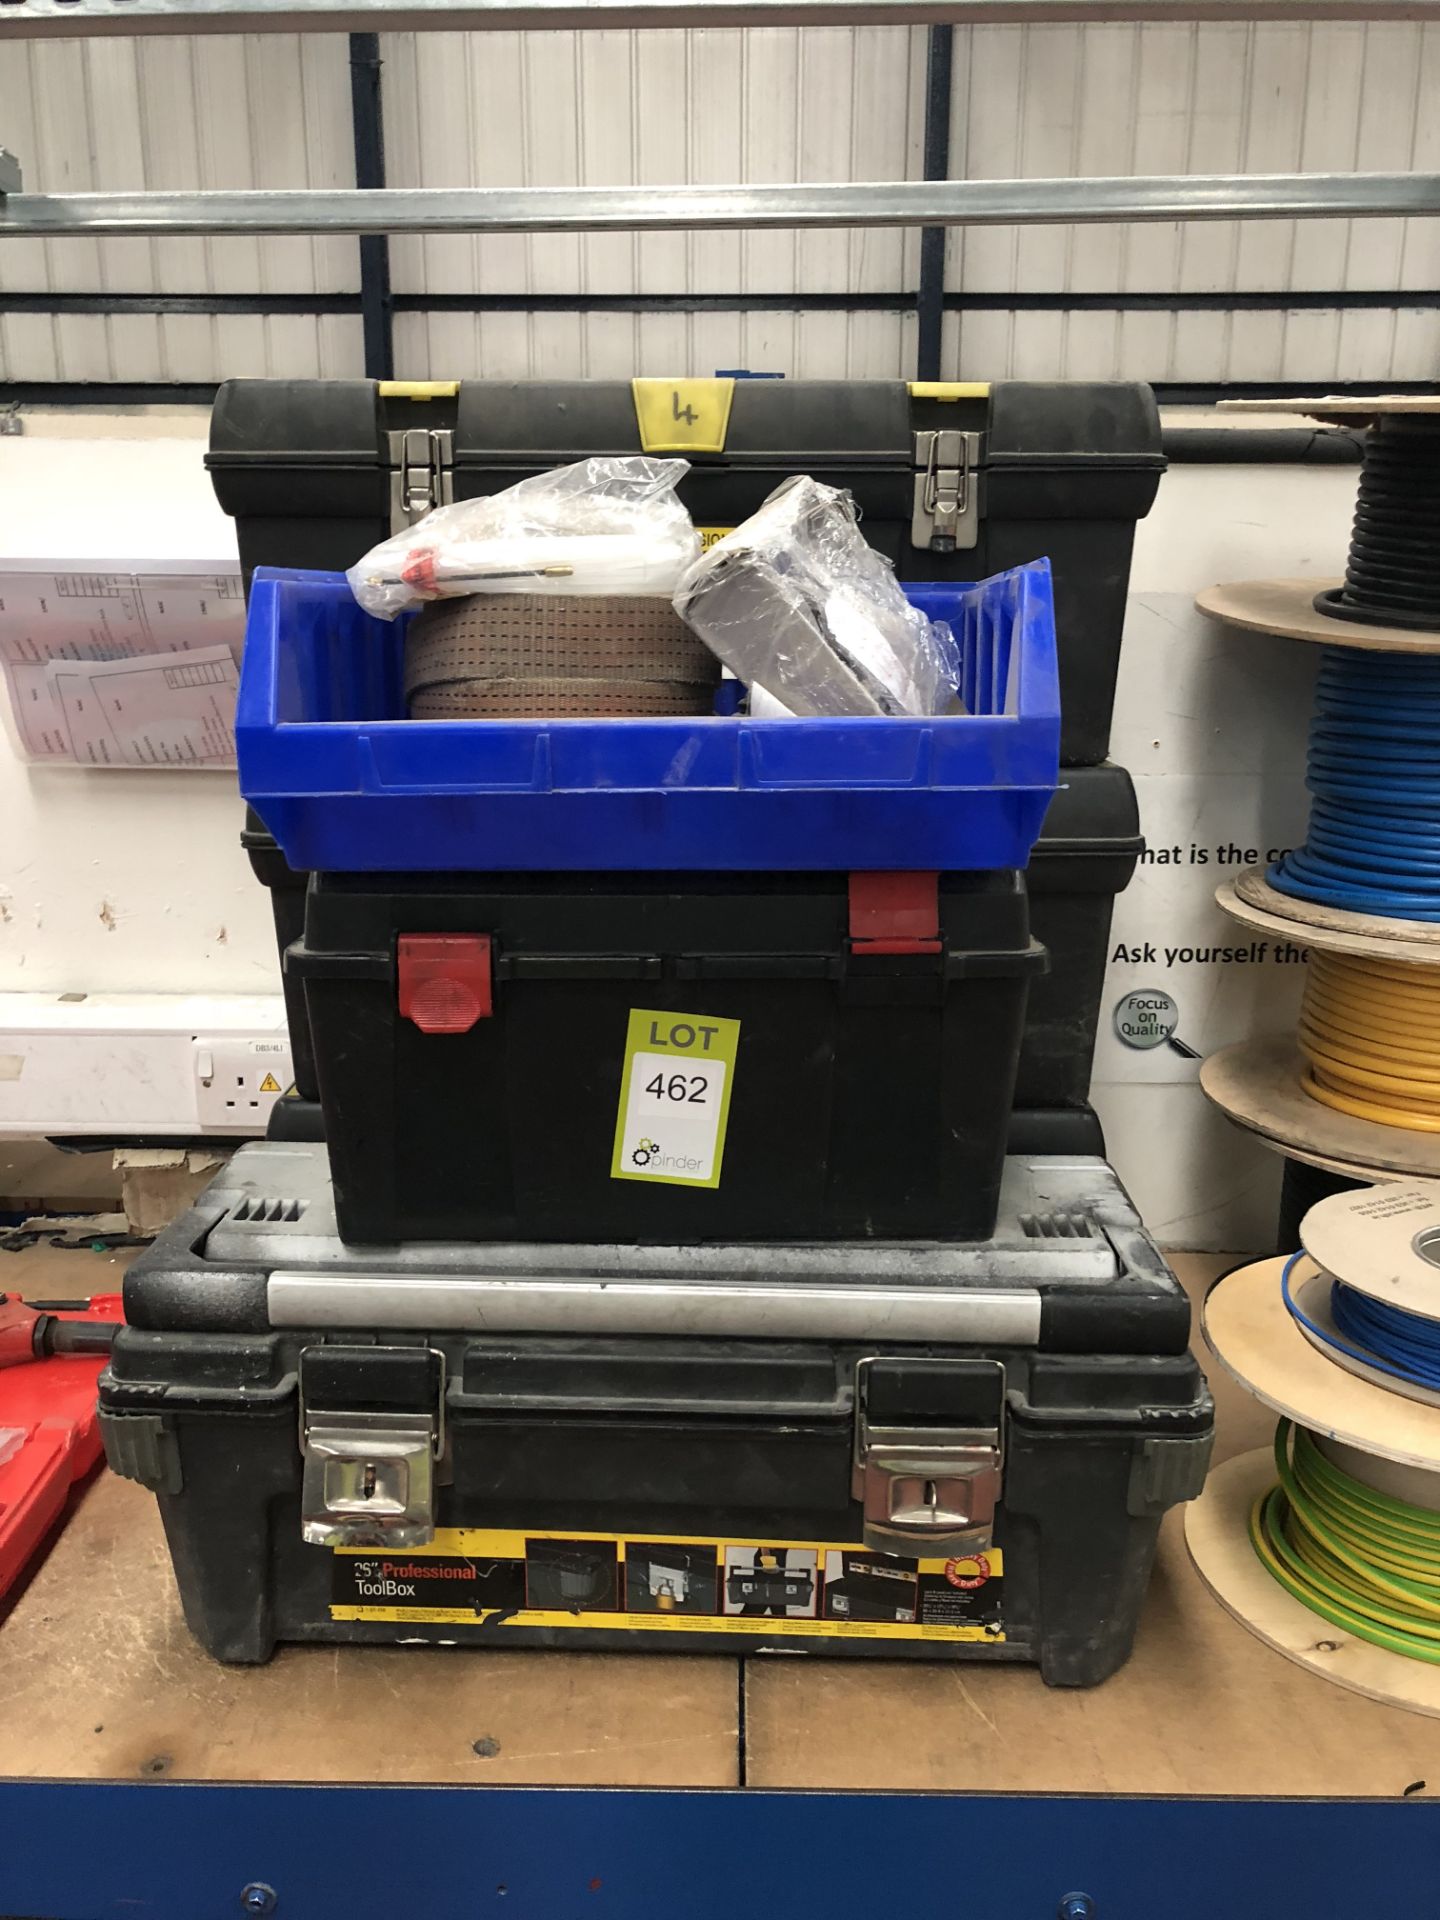 4 Tool Boxes and Ratchet Straps (located in Bay 4)